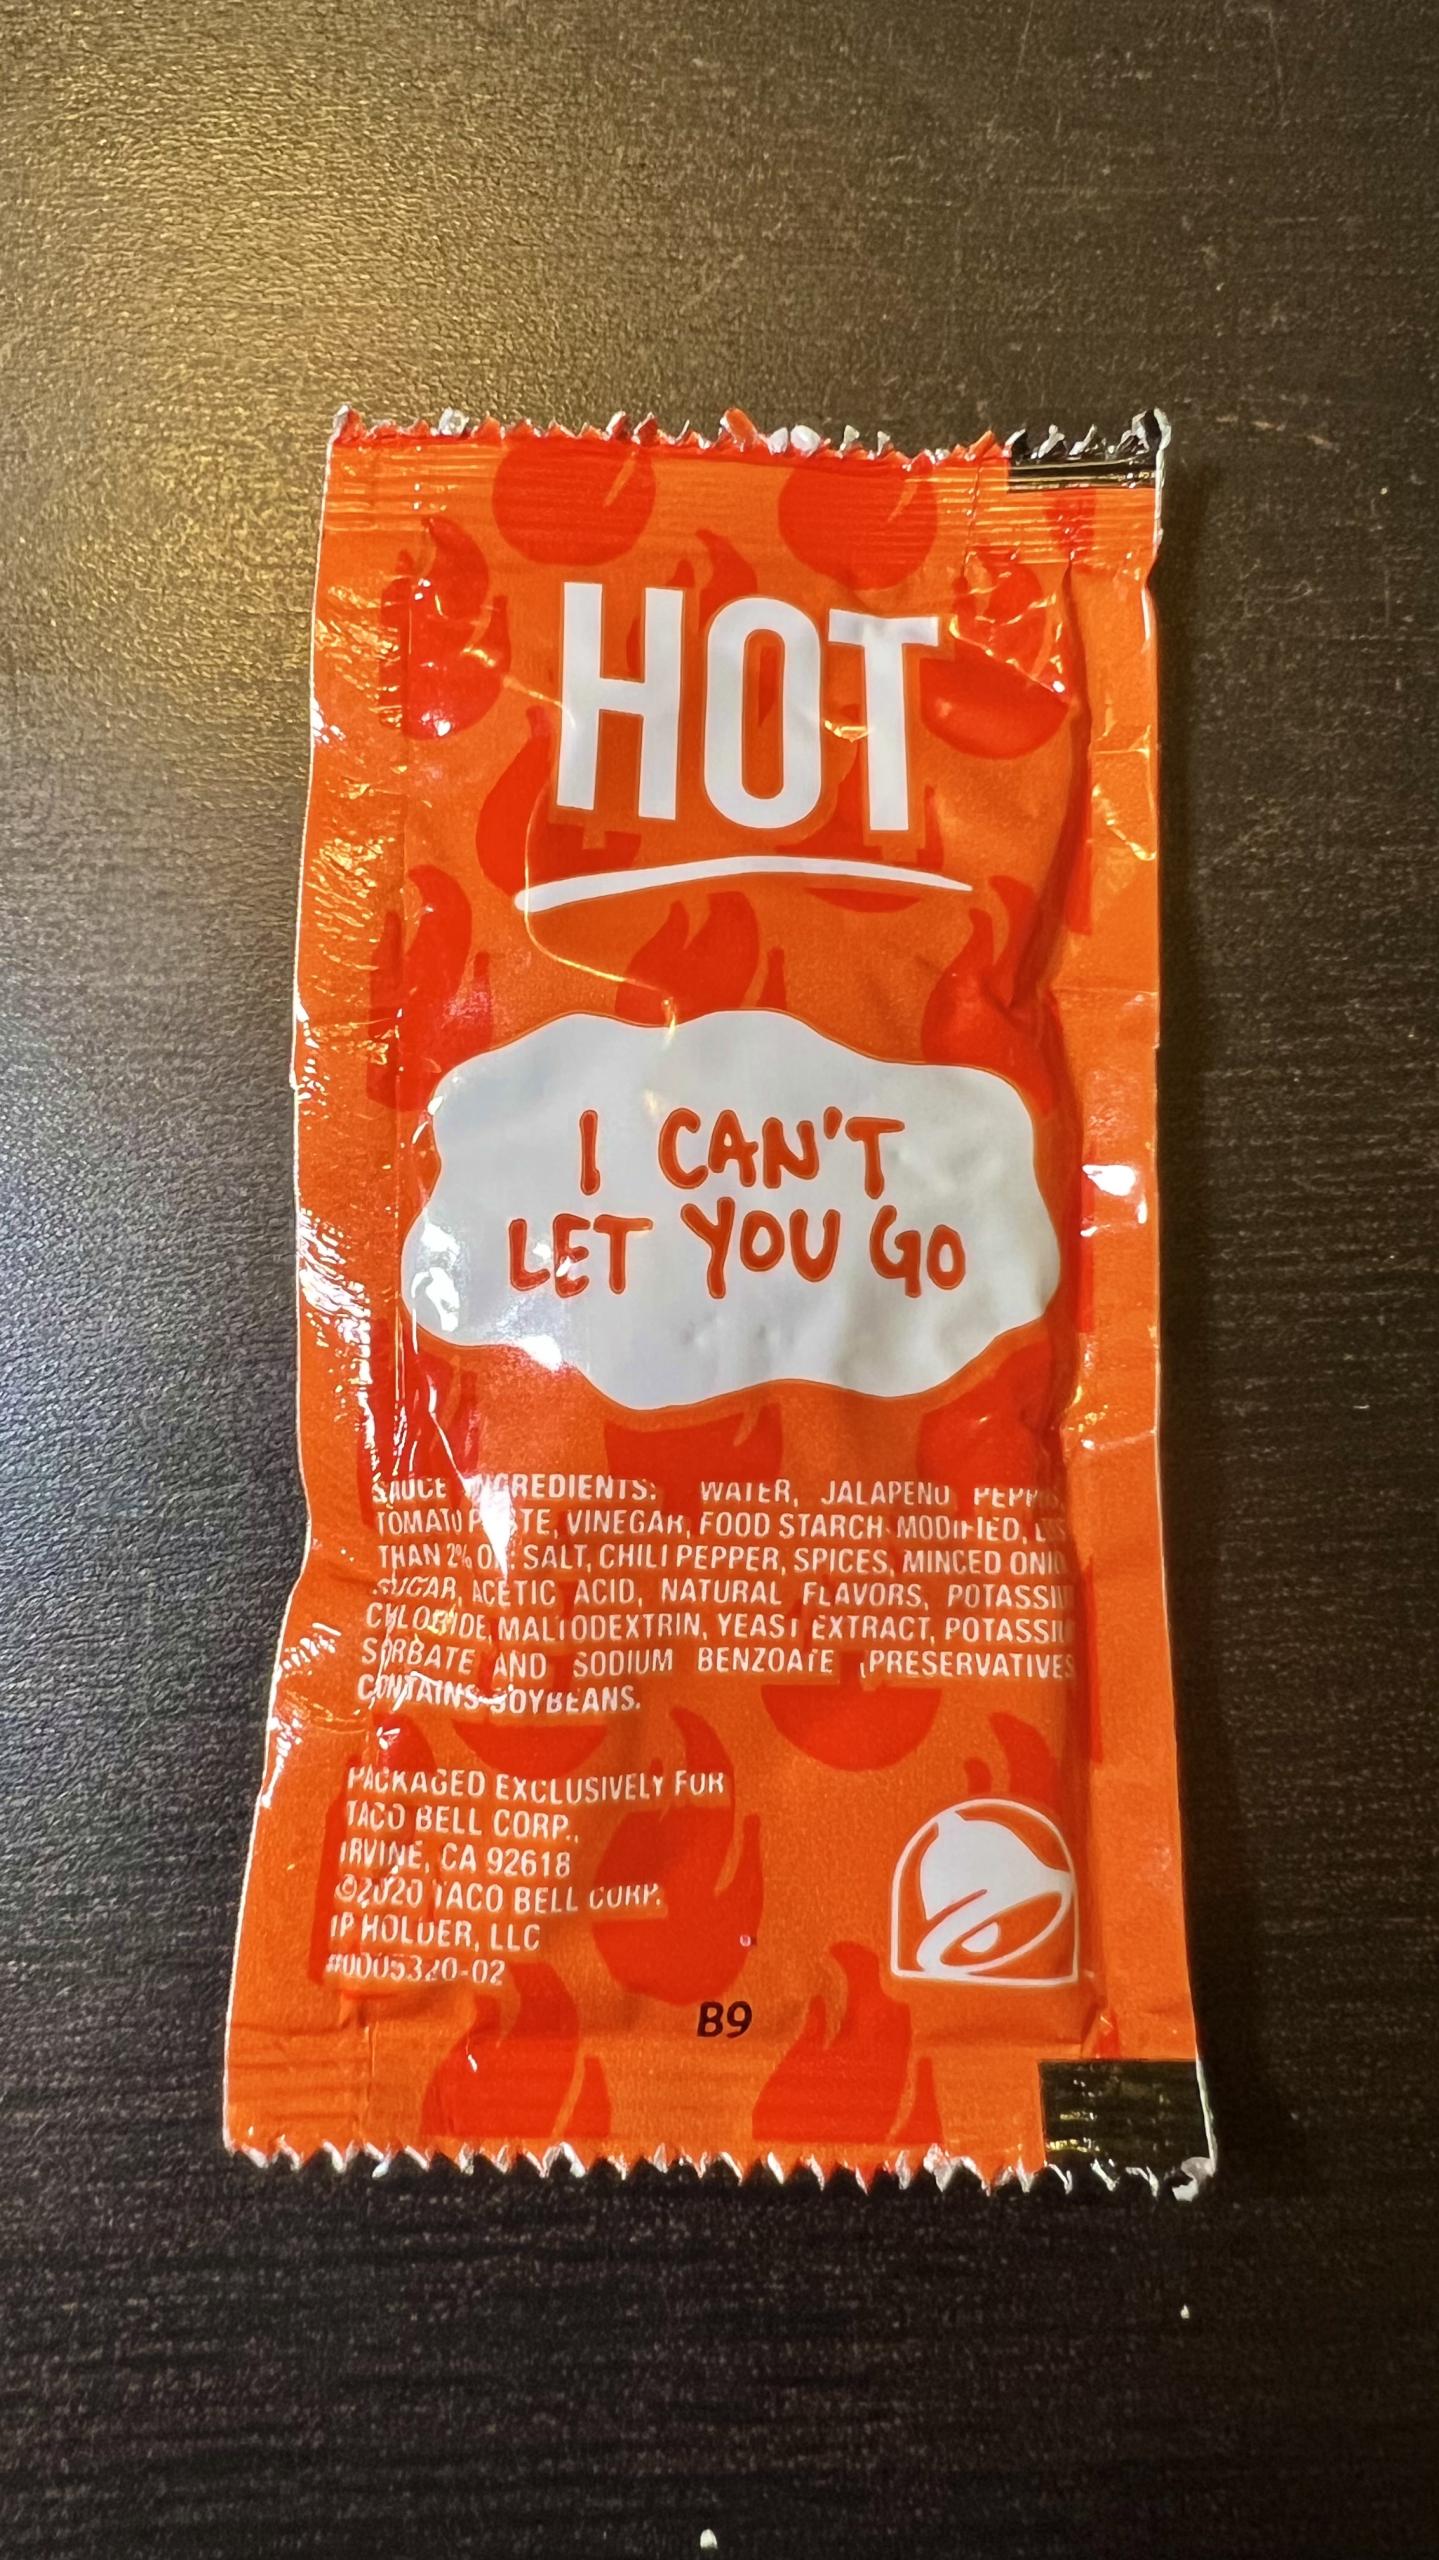 Taco Bell hot sauce "I can't let you go"